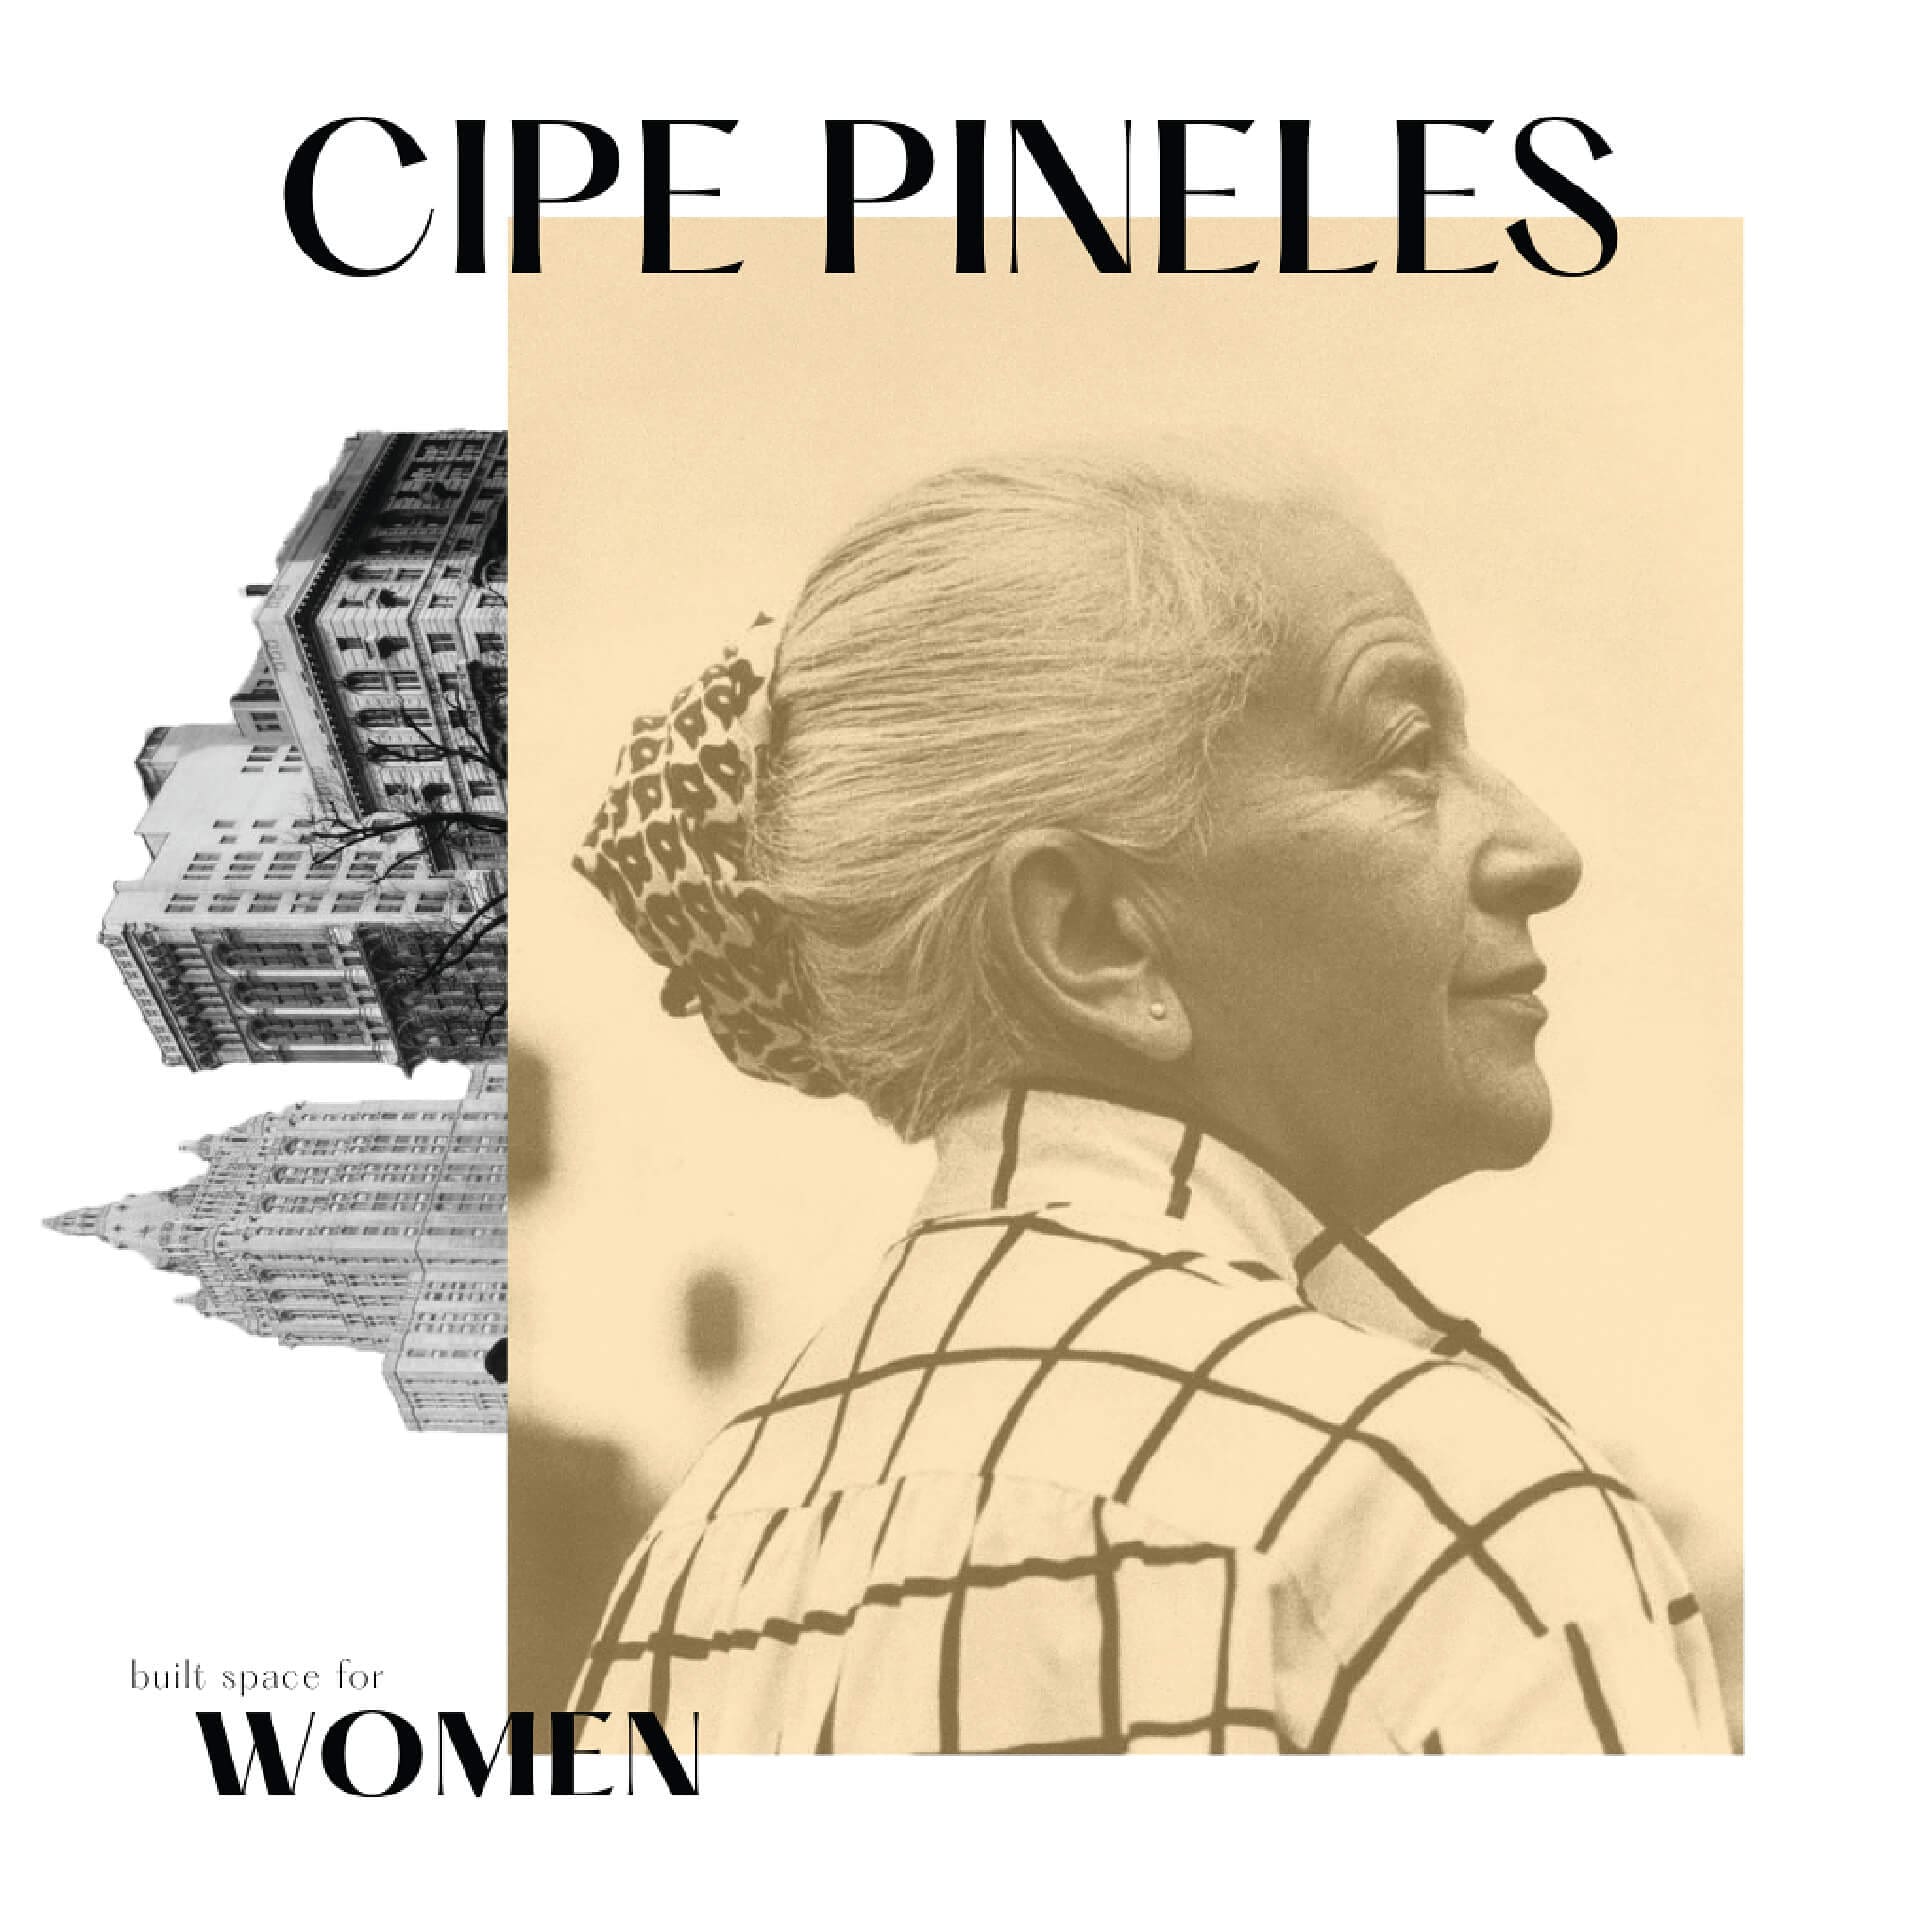 Digital book design that features a large black title that reads "Cipe Pineles". To the right are black and white buildings arranged vertically. To the left is a photo an old woman's side profile, with a yellow filter on top.